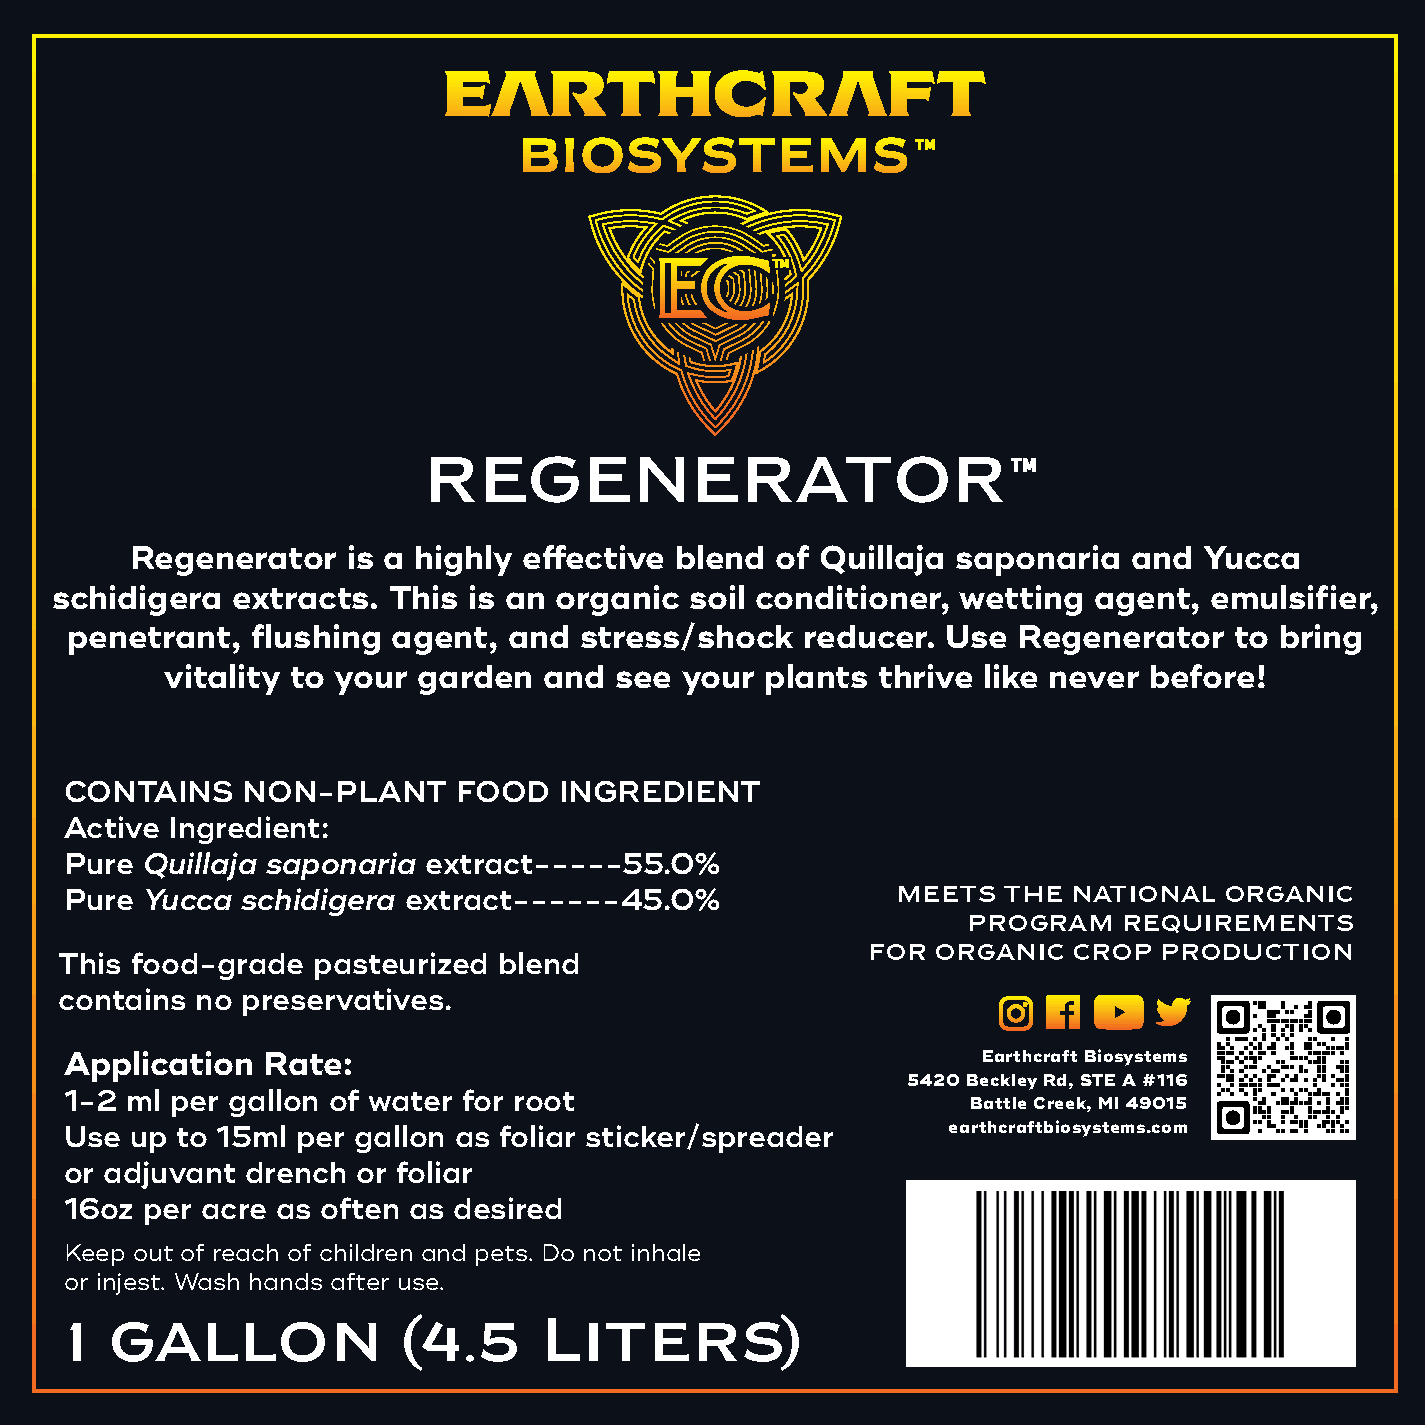 egenerator is a highly effective blend of Quillaja saponaria and Yucca schidigera extracts